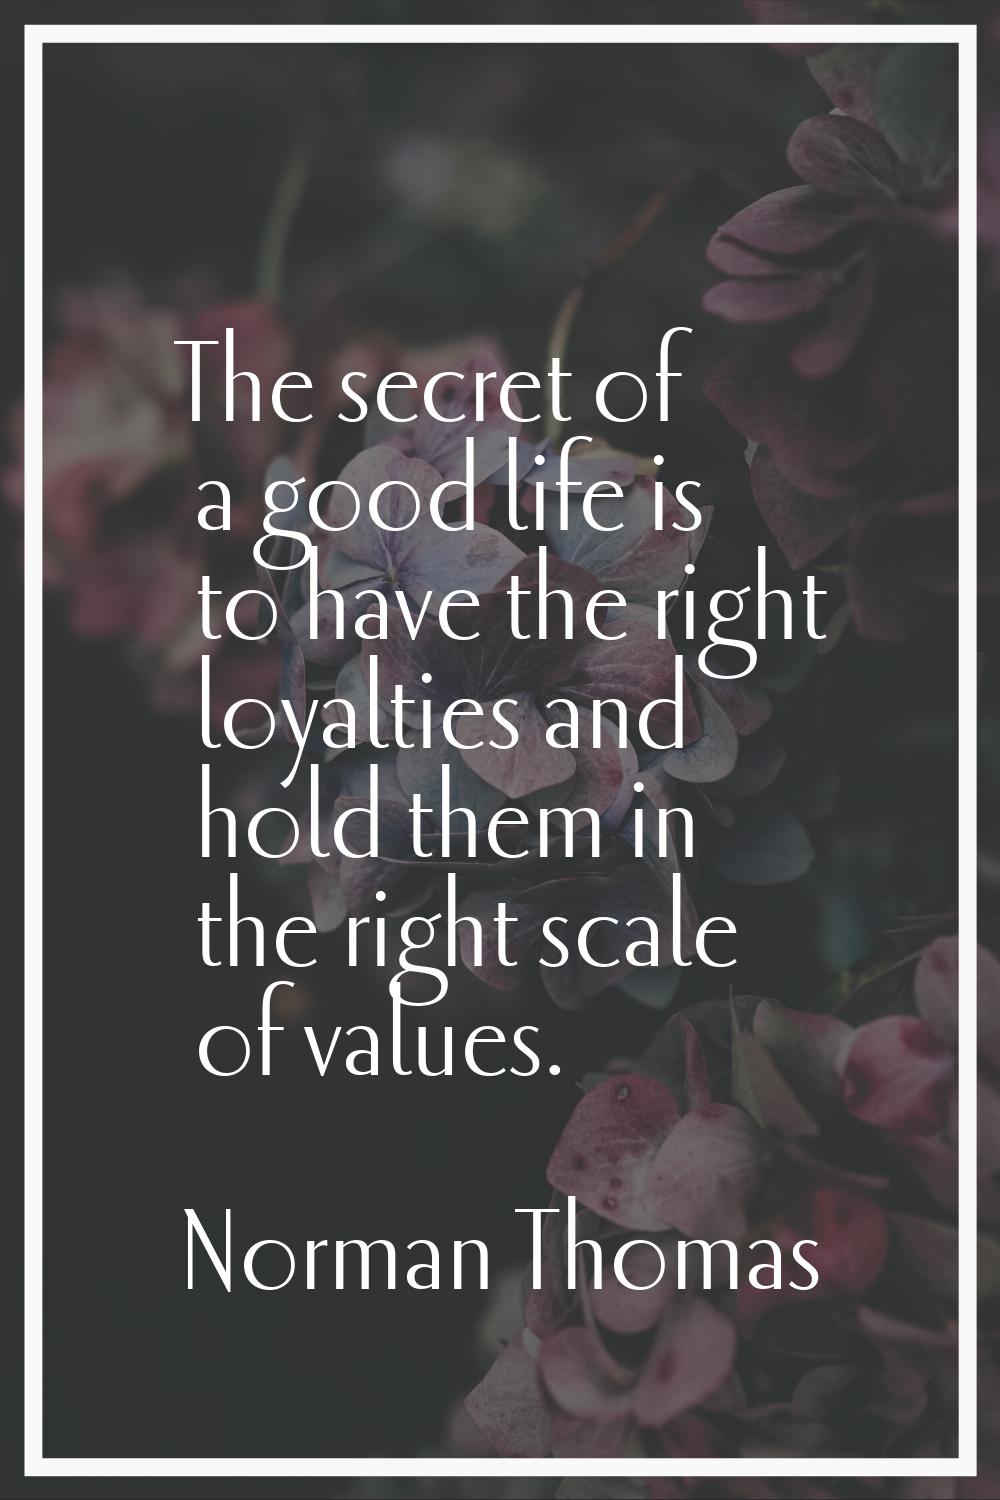 The secret of a good life is to have the right loyalties and hold them in the right scale of values